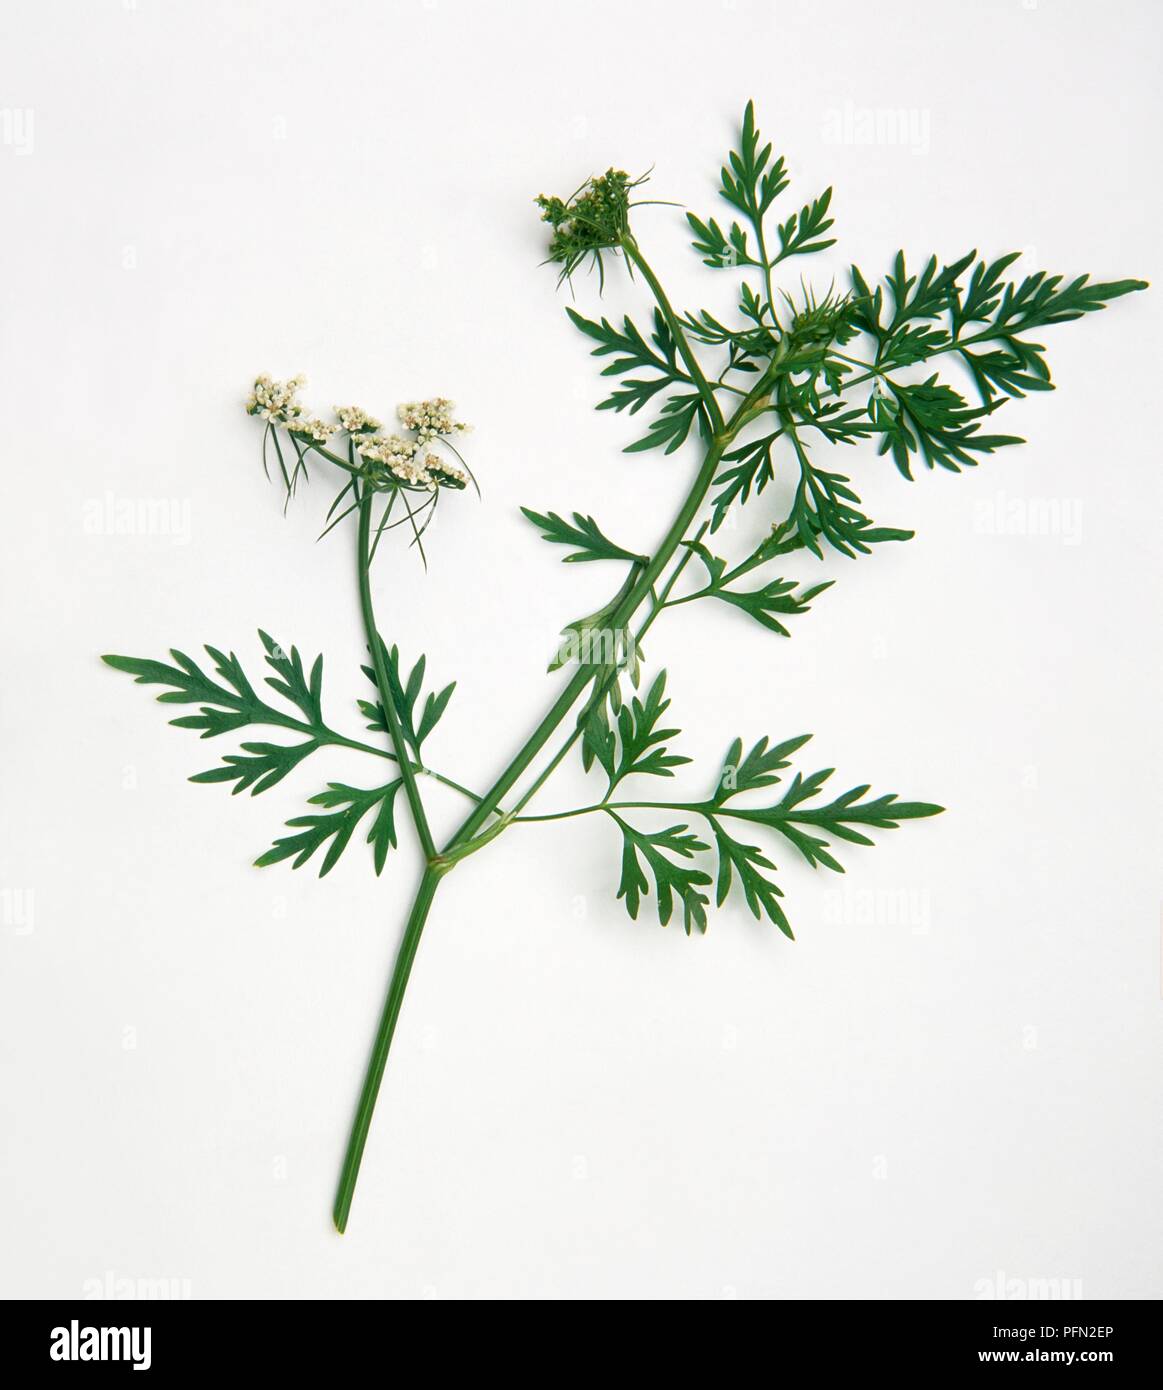 Aethusa cynapium (Fool's parsley), stem with white flowers in umbels, and green leaves Stock Photo